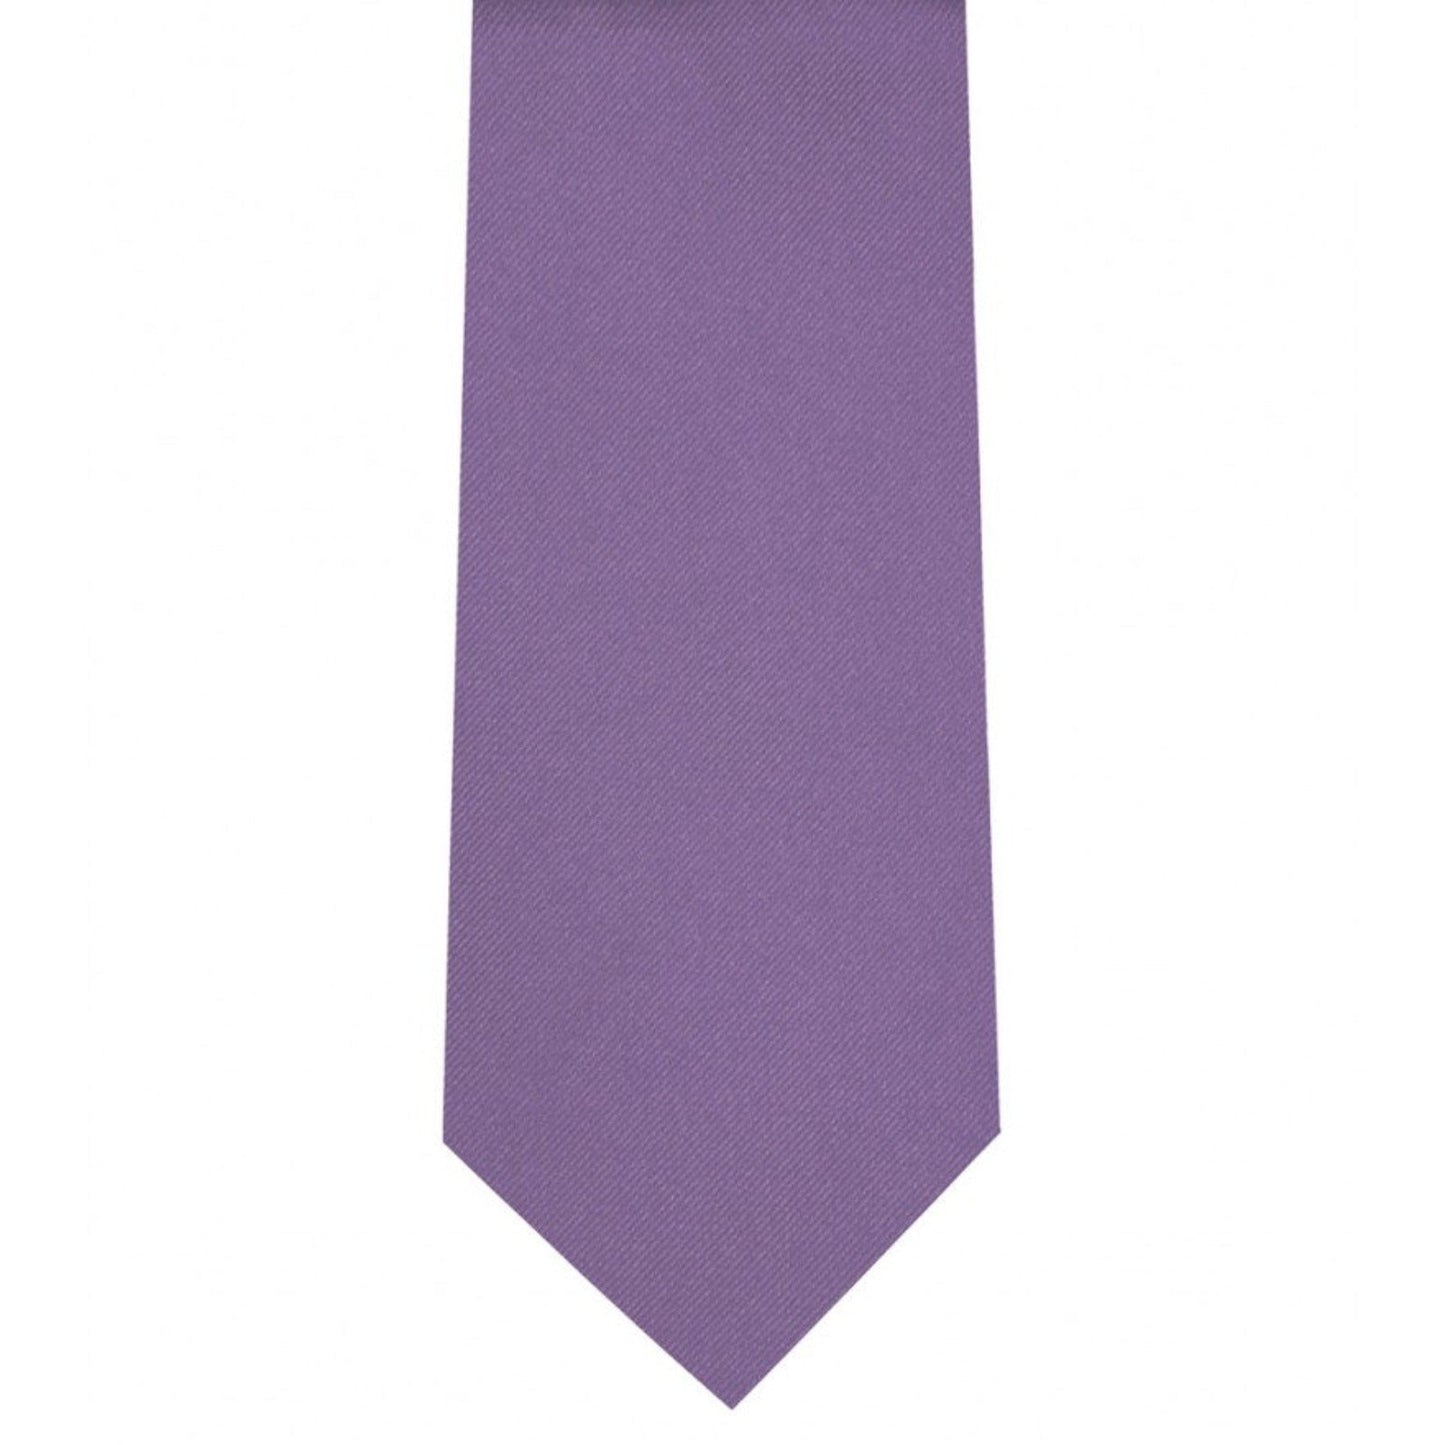 Classic Pastel Purple Tie Ultra Skinny tie width 2.25 inches With Matching Pocket Square | KCT Menswear